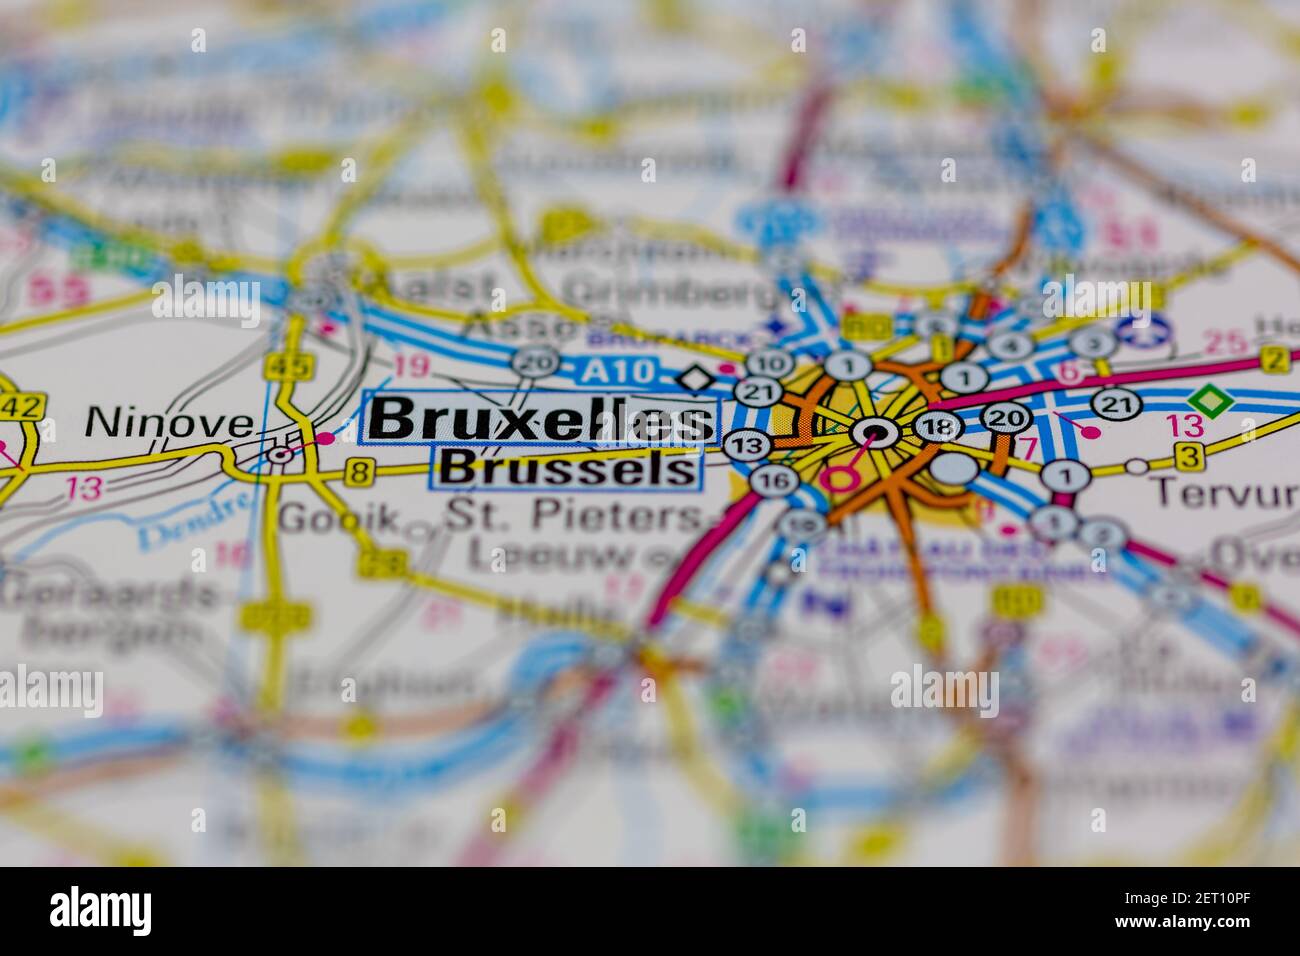 Brussels Or Bruxelles Shown On A Road Map Or Geography Map 2ET10PF 